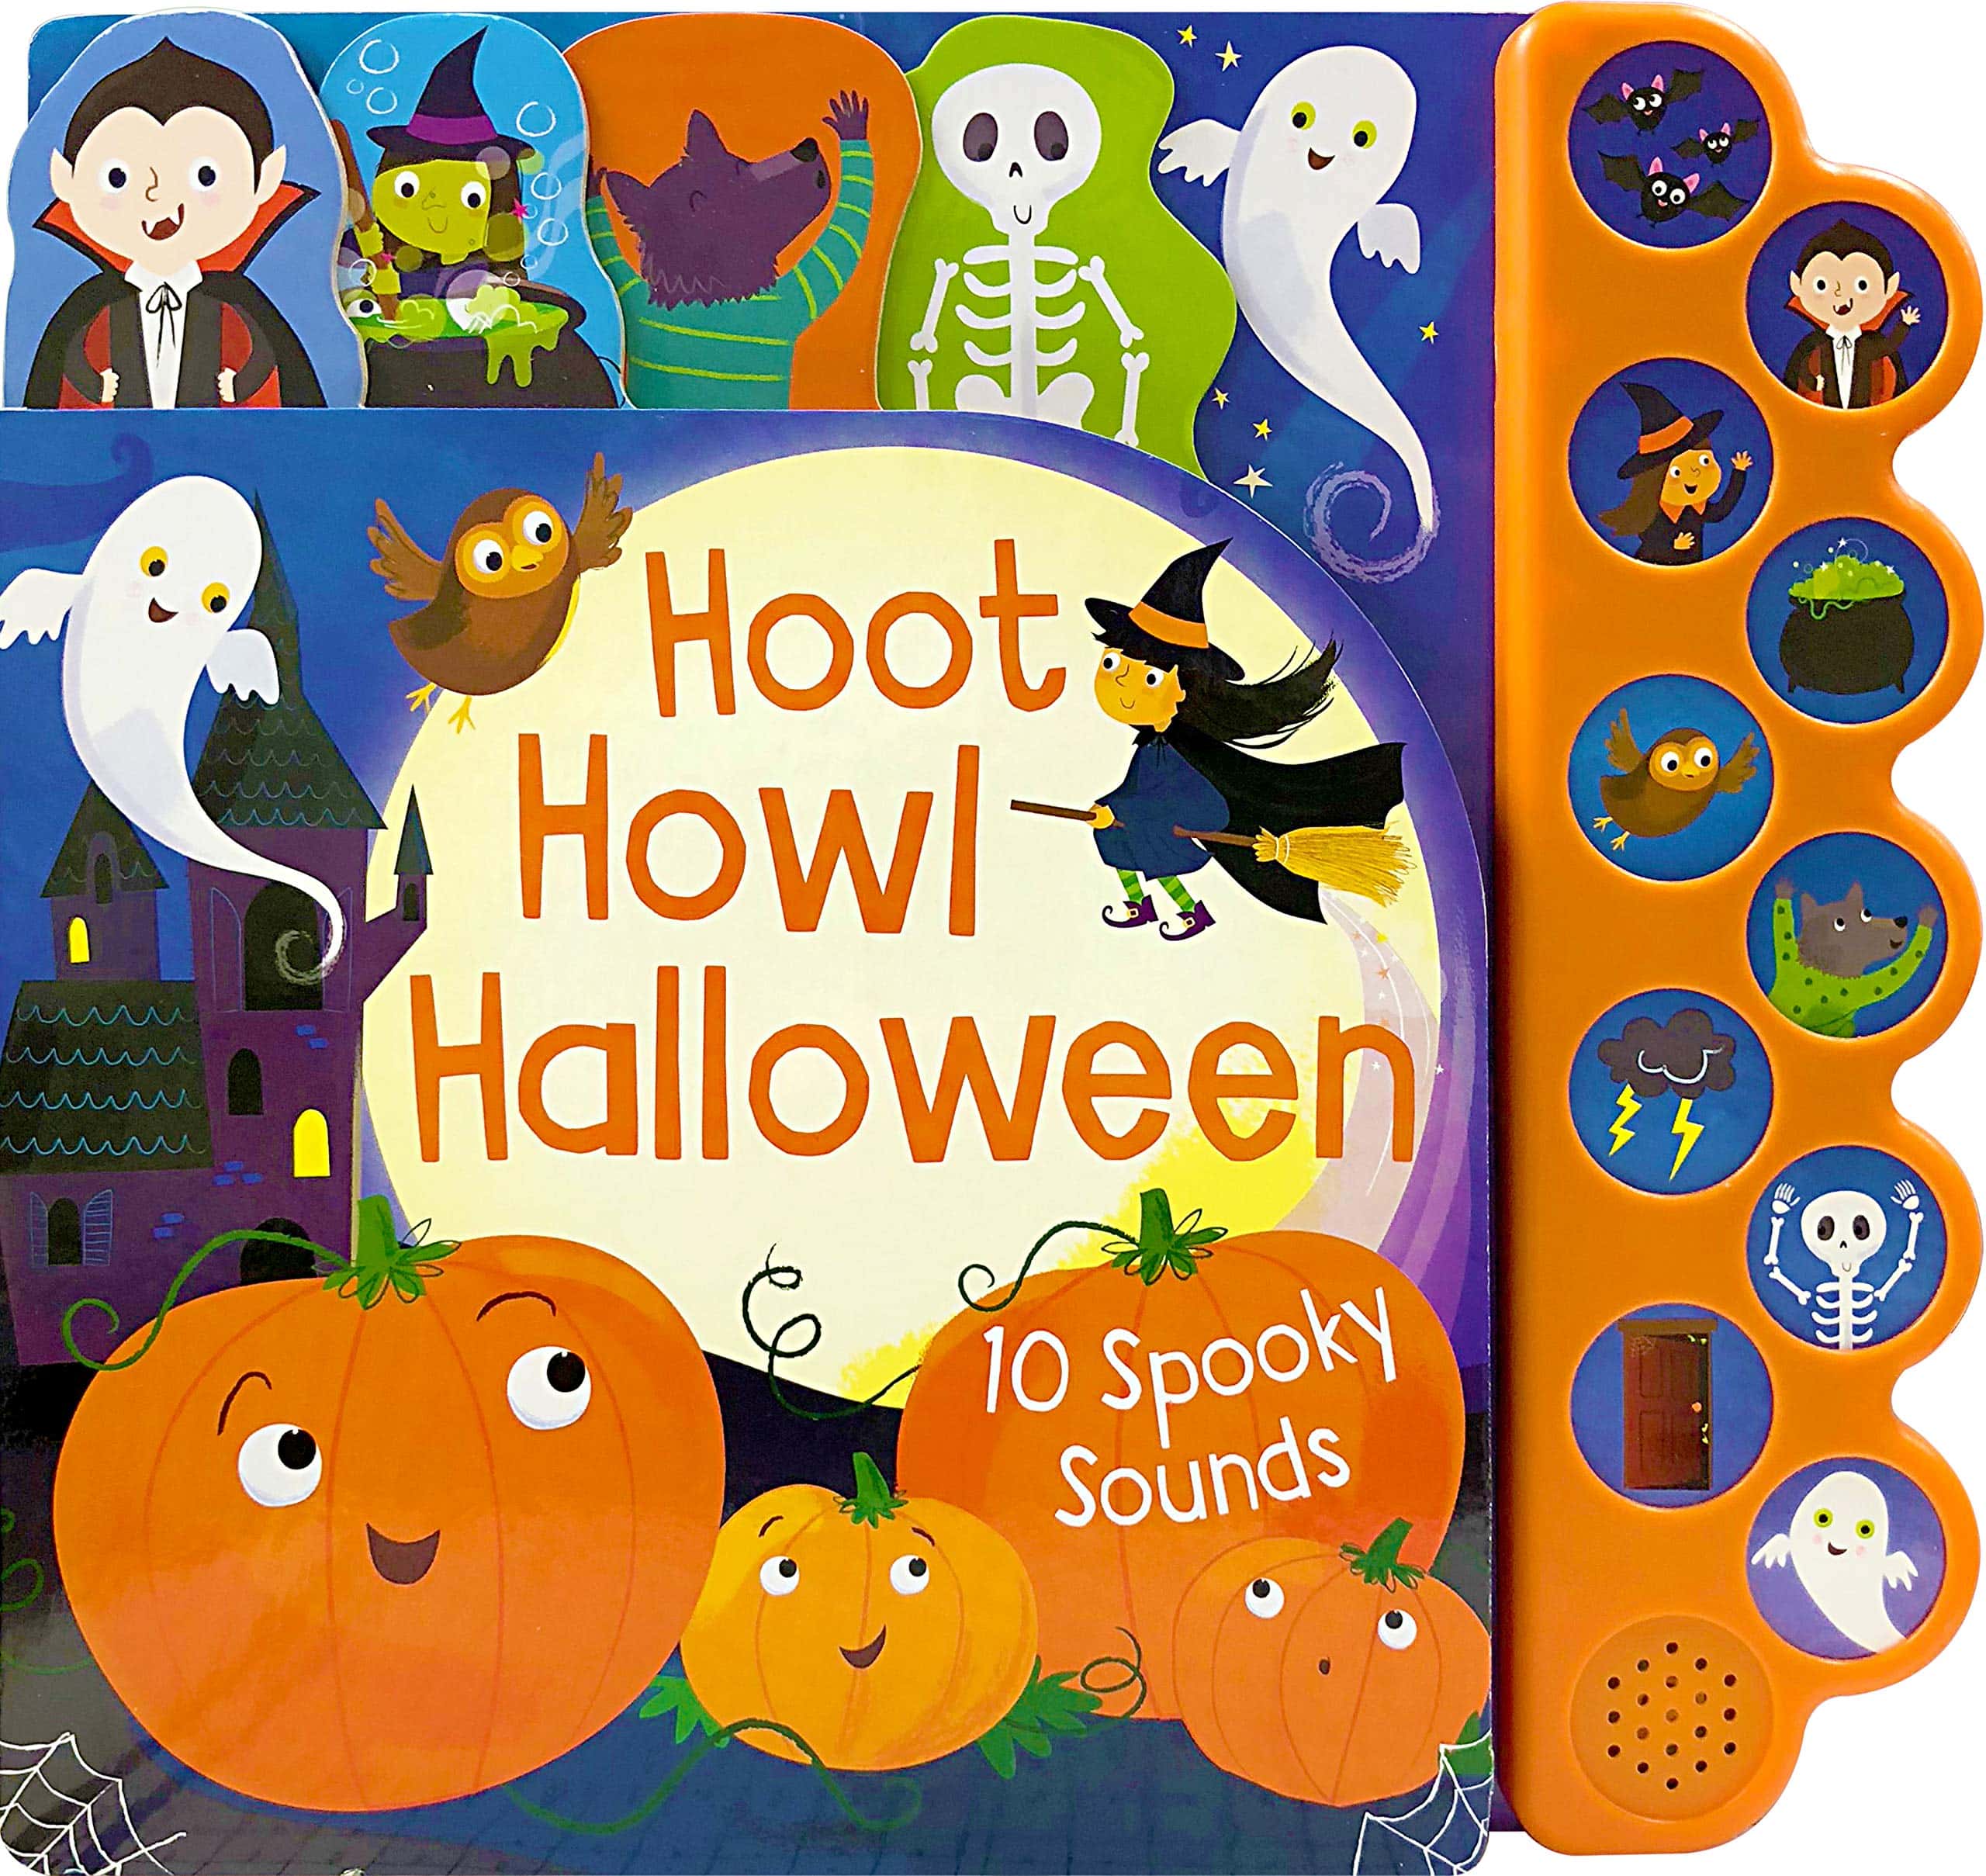 "Hoot Howl Halloween" by Becky Wilson and Parragon Books